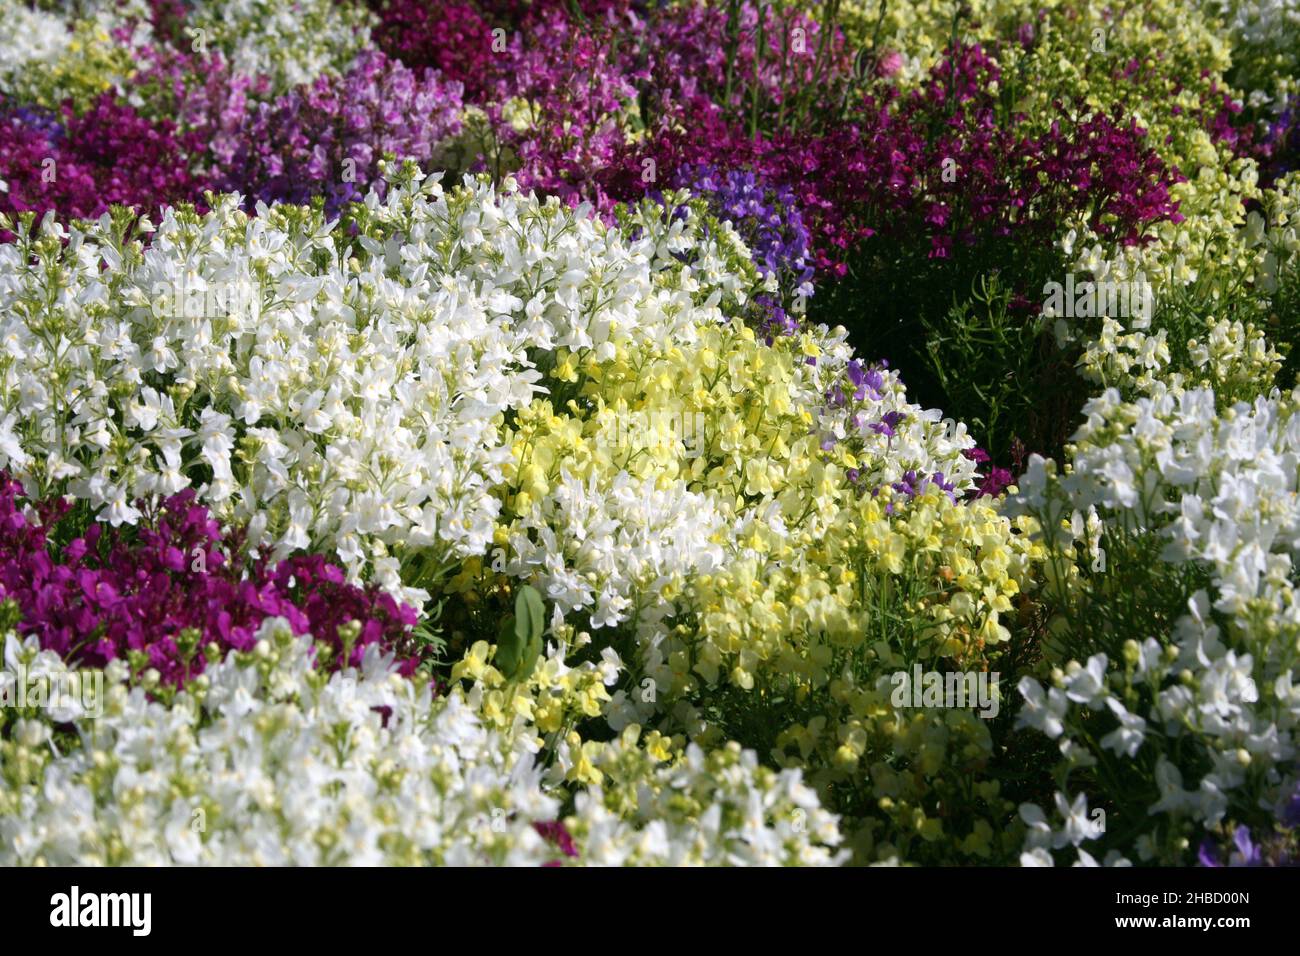 GARDEN BED OF COLOURFUL LINARIA COMMONLY KNOWN AS TOADFLAX Stock Photo